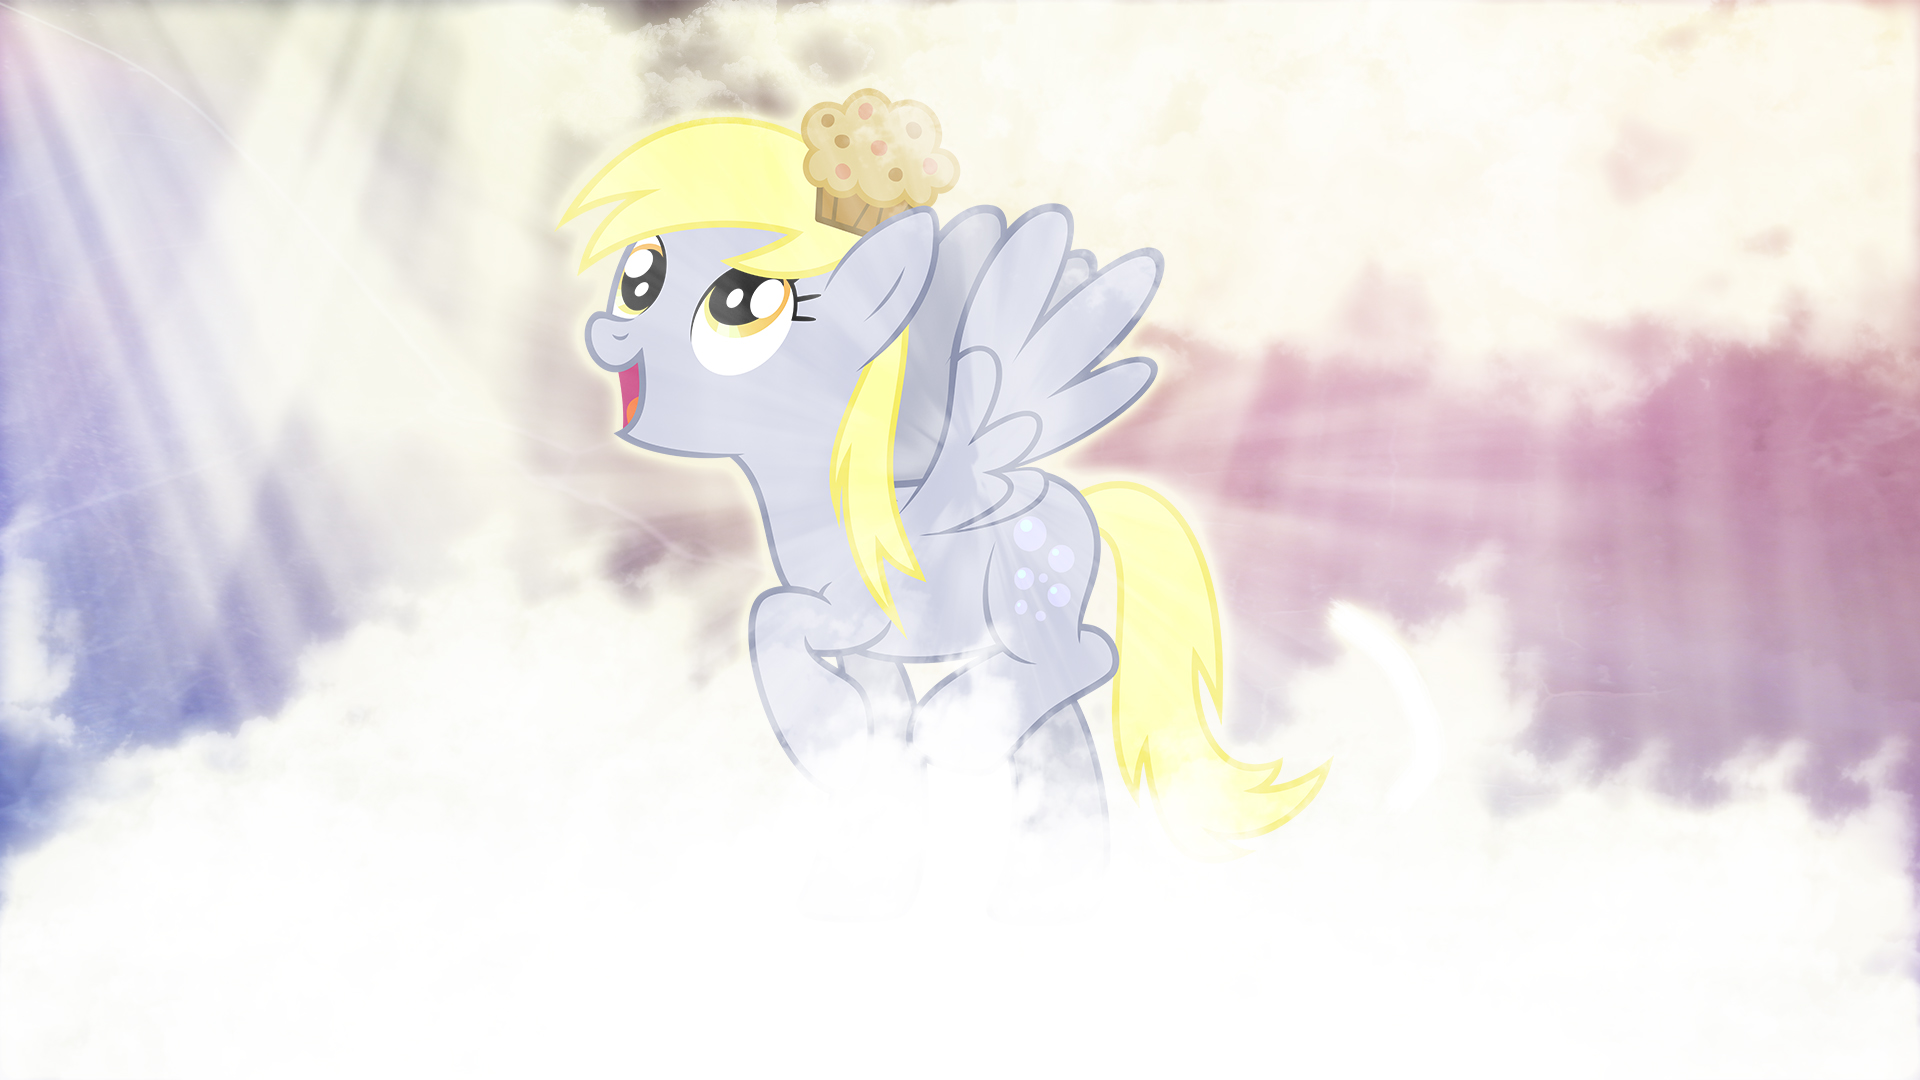 Heavenly Derpy by DaydreamSyndrom and XVinyl-OctaviaX